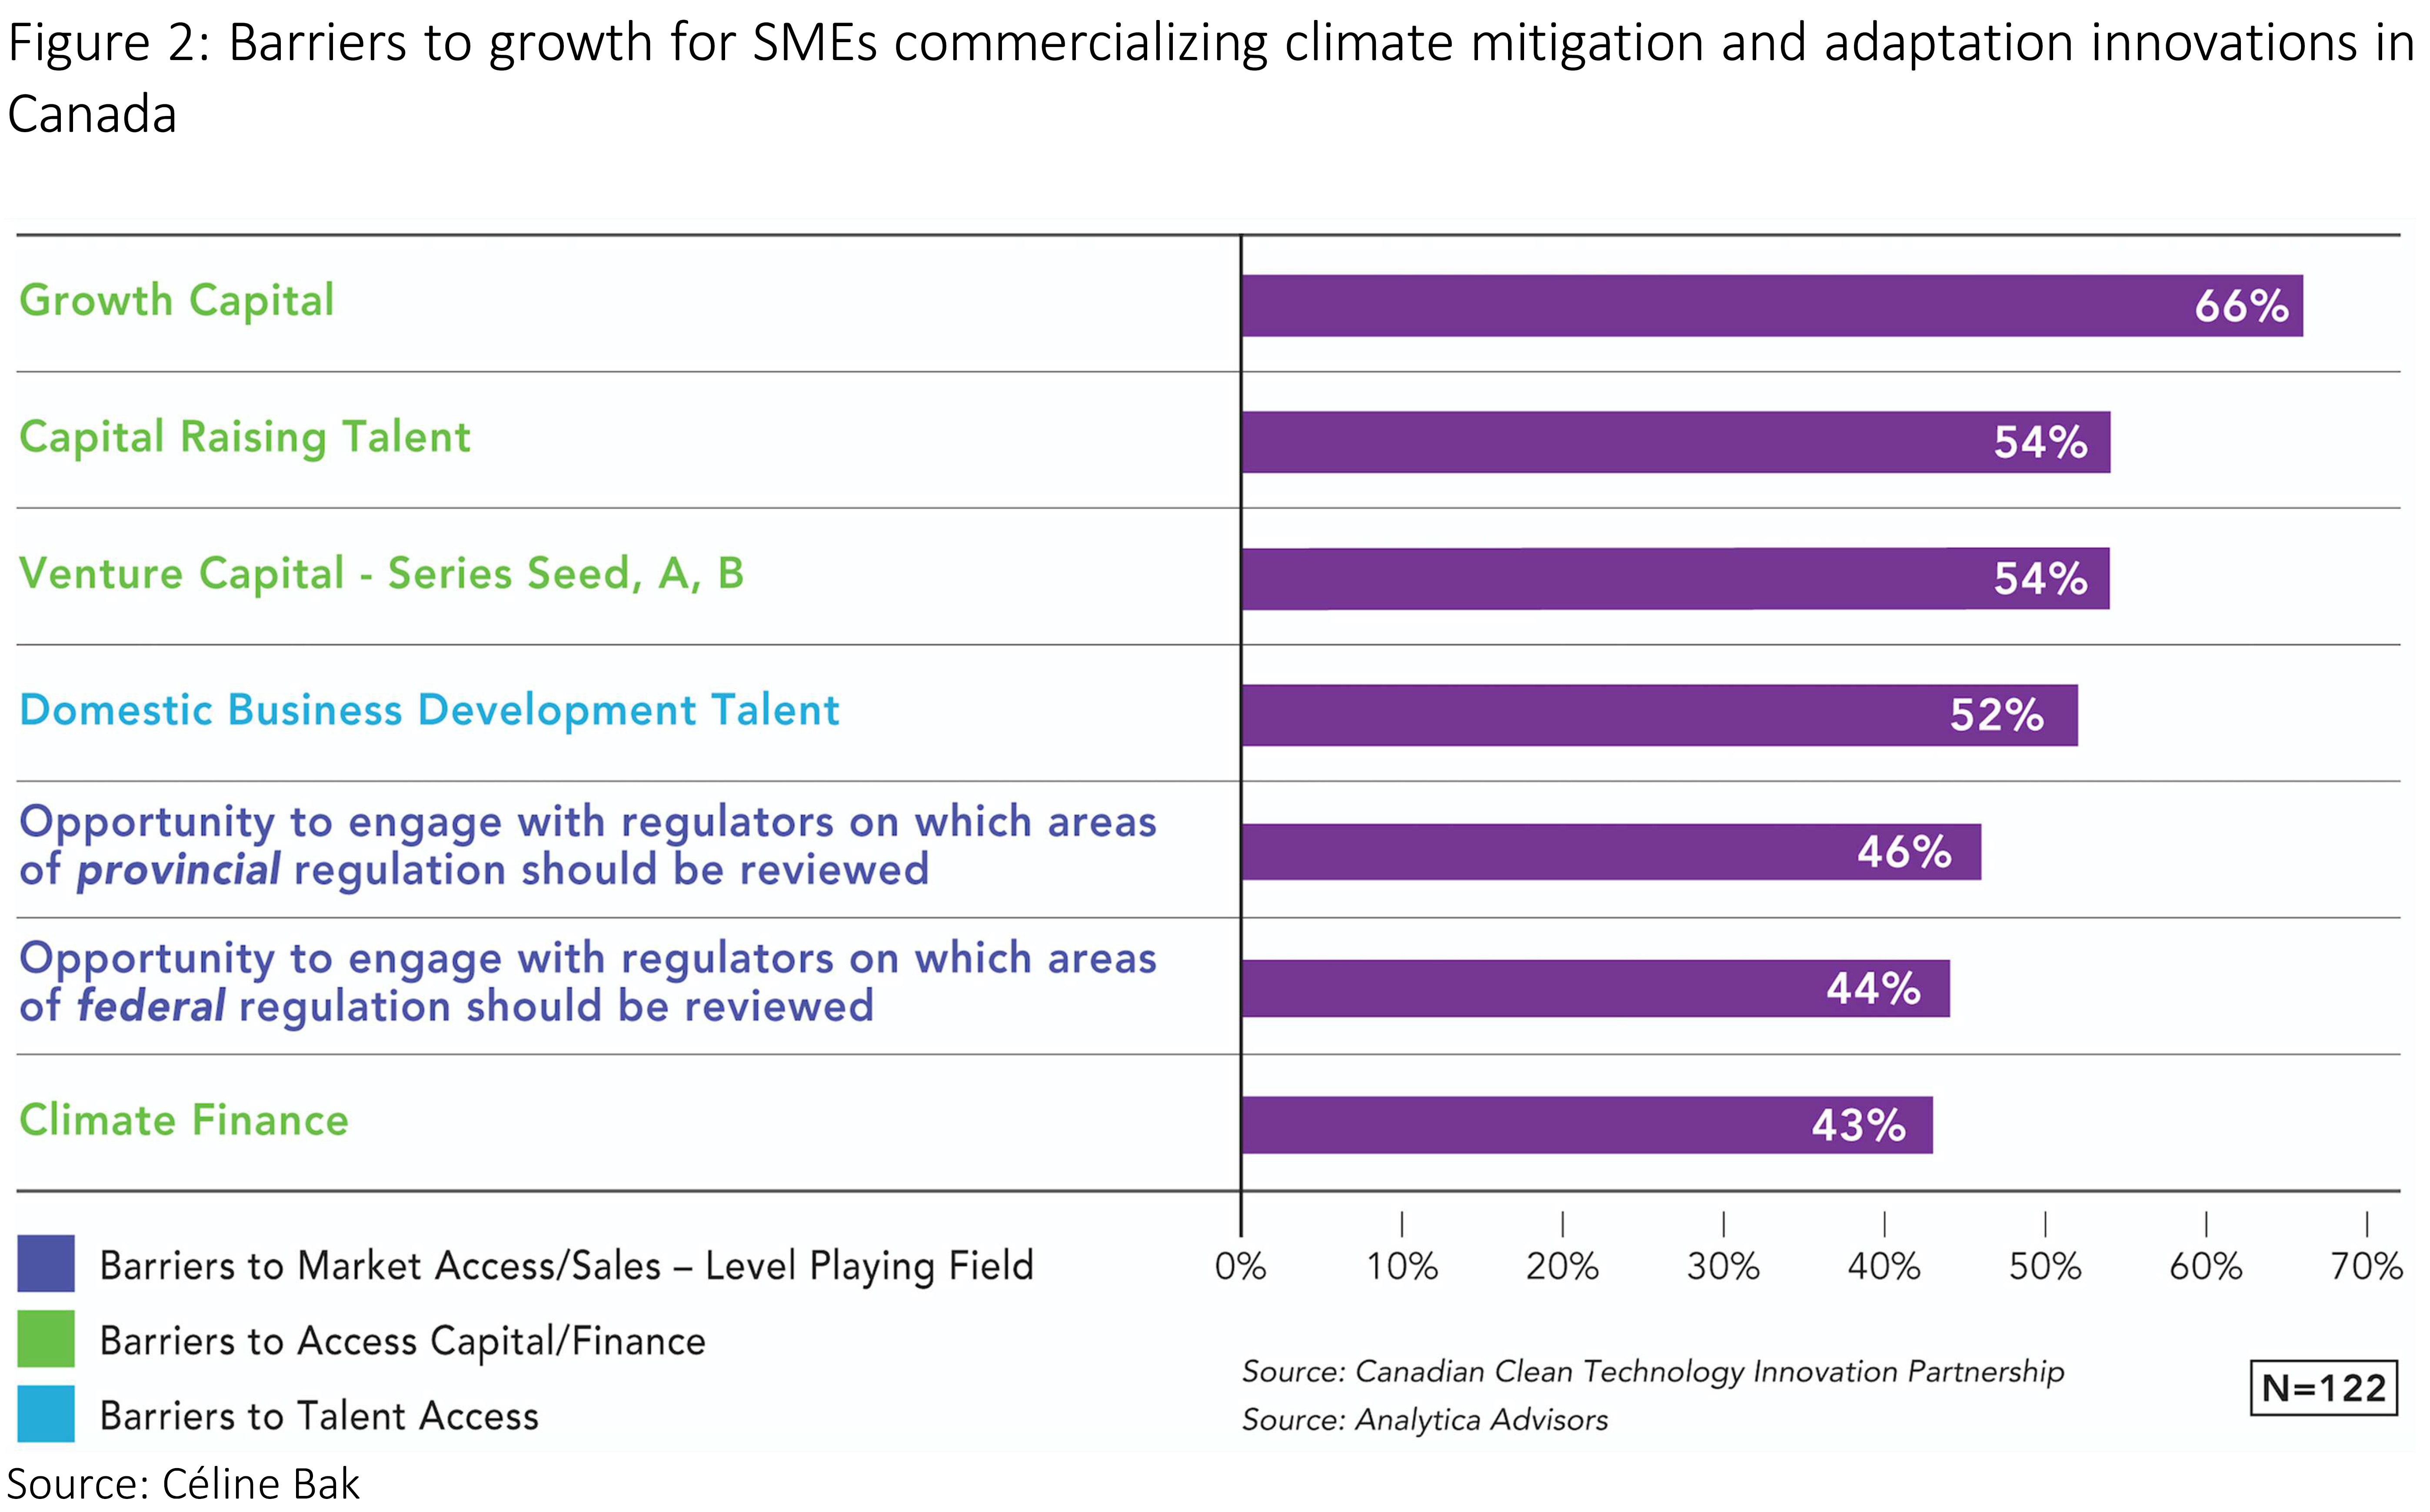 Barriers to grwoth for SMEs by percentage